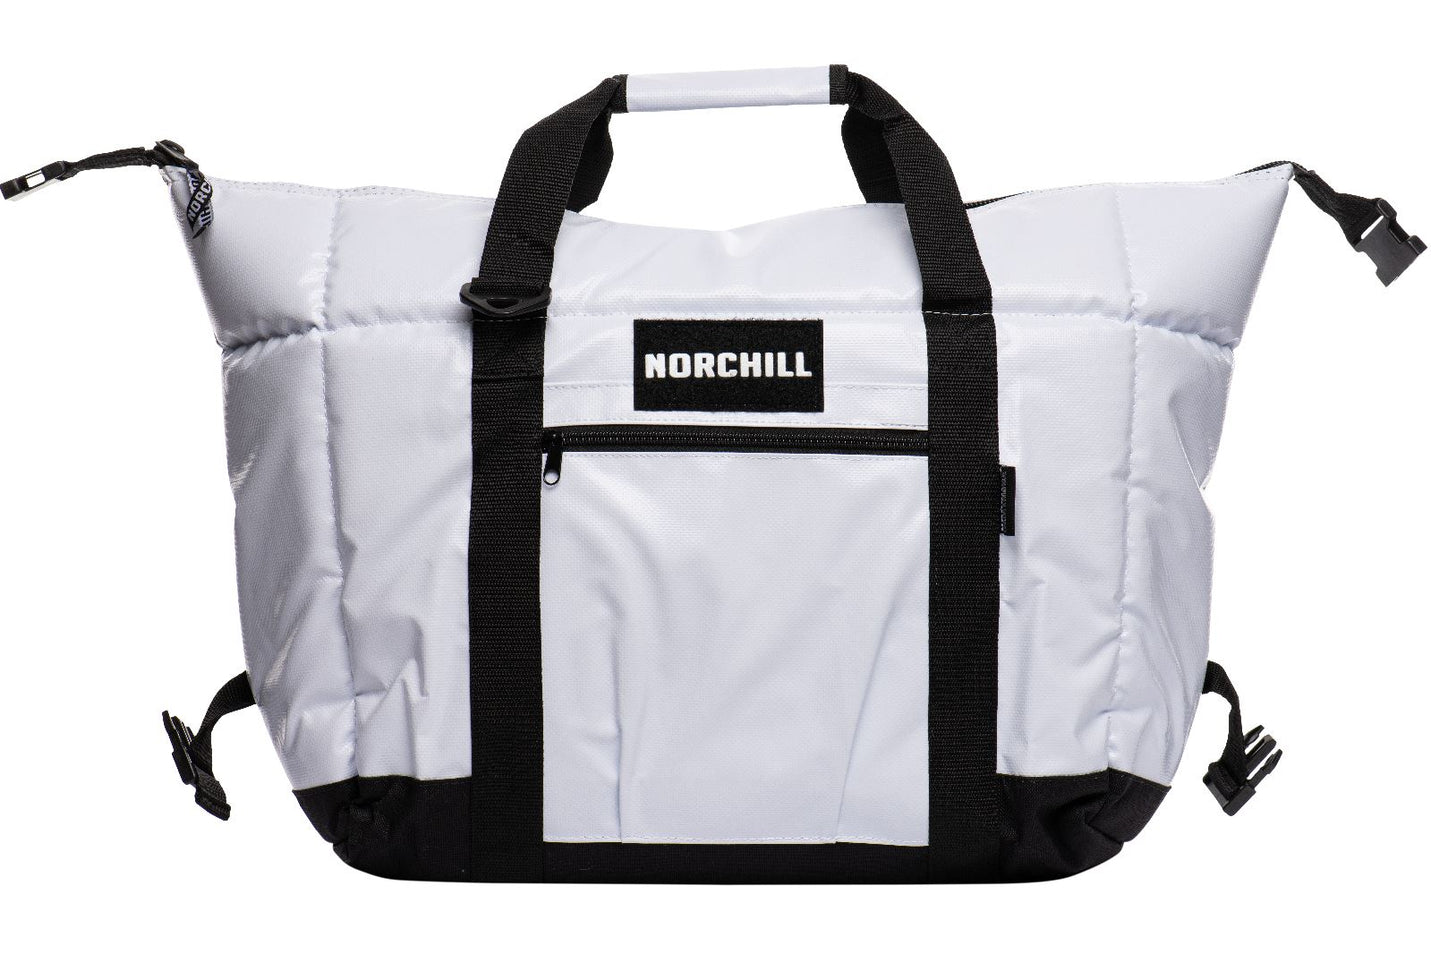 Norchill BoatBag Xtreme Small 12-Can Cooler Bag - White Tarpaulin